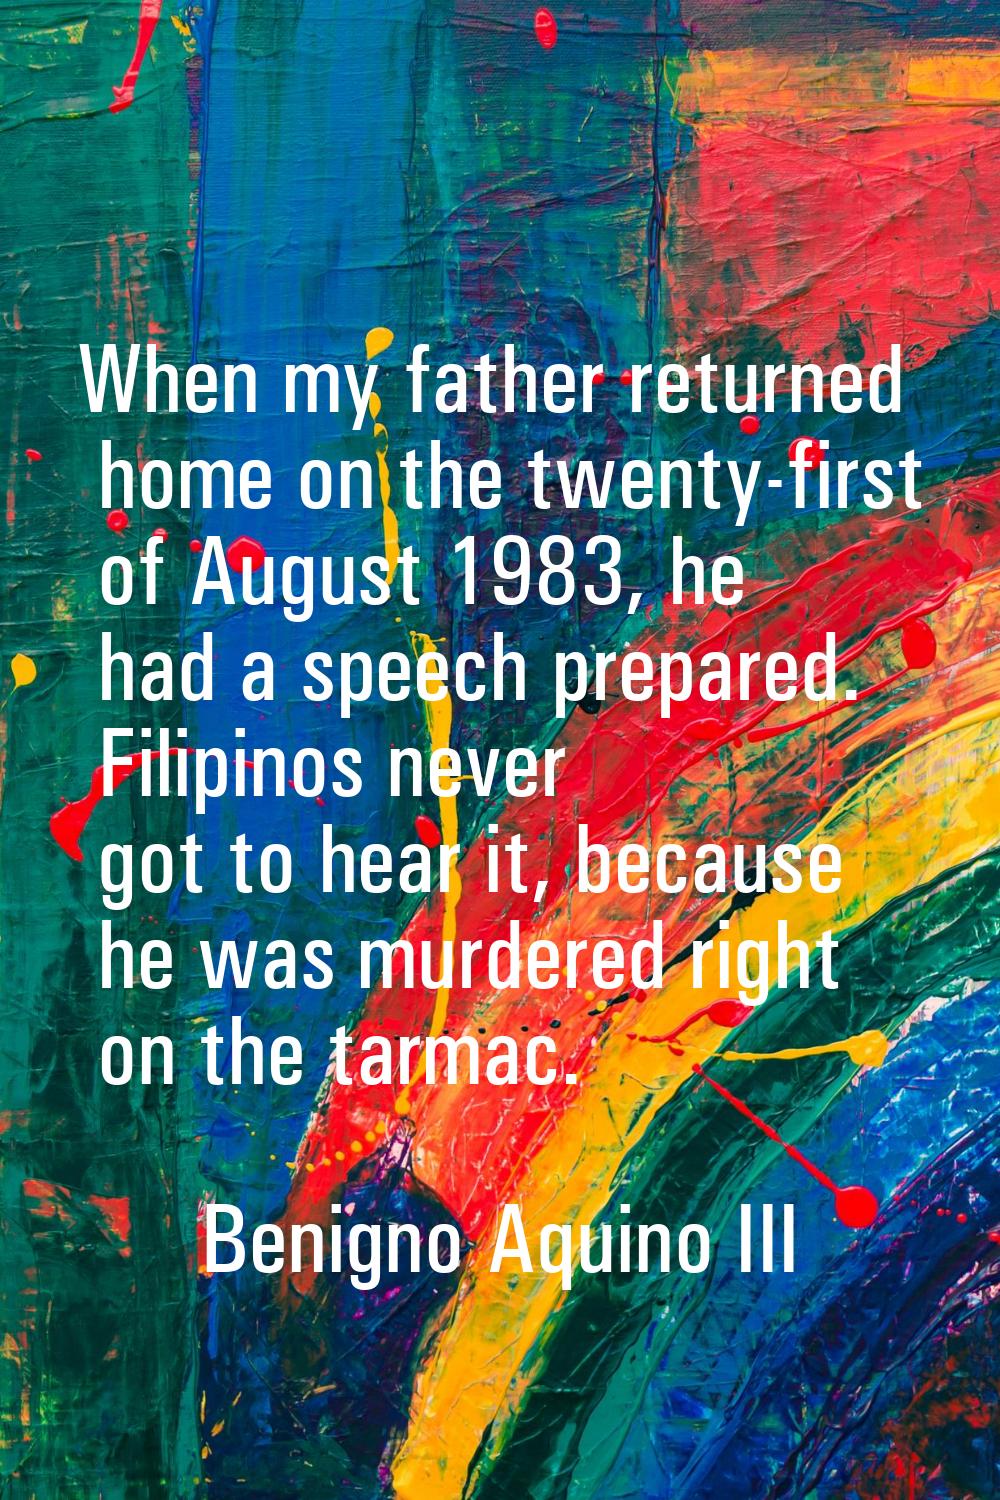 When my father returned home on the twenty-first of August 1983, he had a speech prepared. Filipino